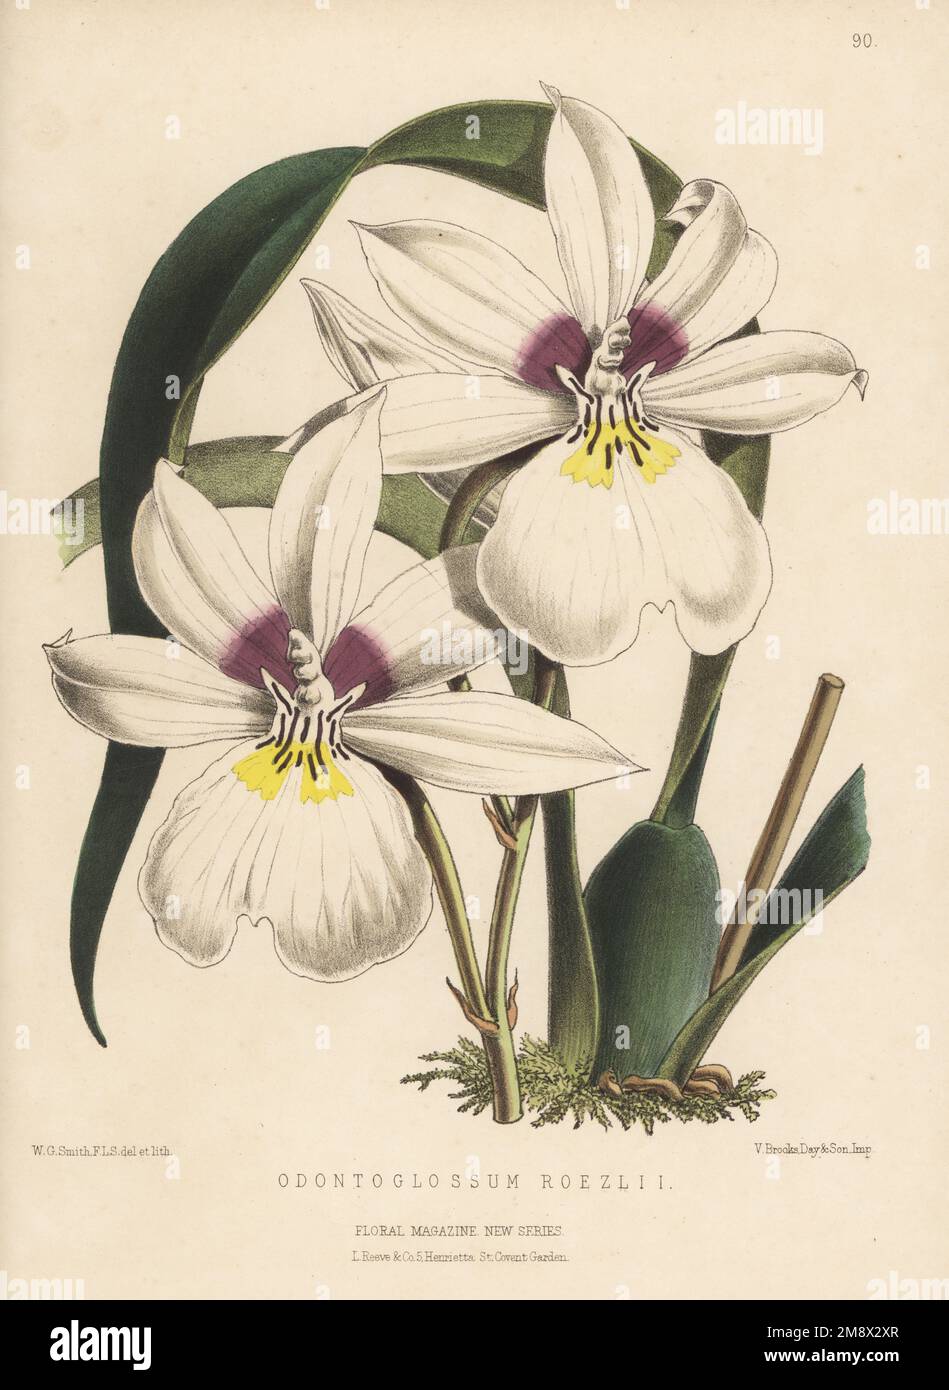 Miltoniopsis roezlii orchid, native to Colombia, Peru, Ecuador and Panama. Imported by nurseryman William Bull, King's Road, Chelsea. As Odontoglossum roezlii. Handcolored botanical illustration drawn and lithographed by Worthington George Smith from Henry Honywood Dombrain's Floral Magazine, New Series, Volume 2, L. Reeve, London, 1873. Lithograph printed  by Vincent Brooks, Day & Son. Stock Photo